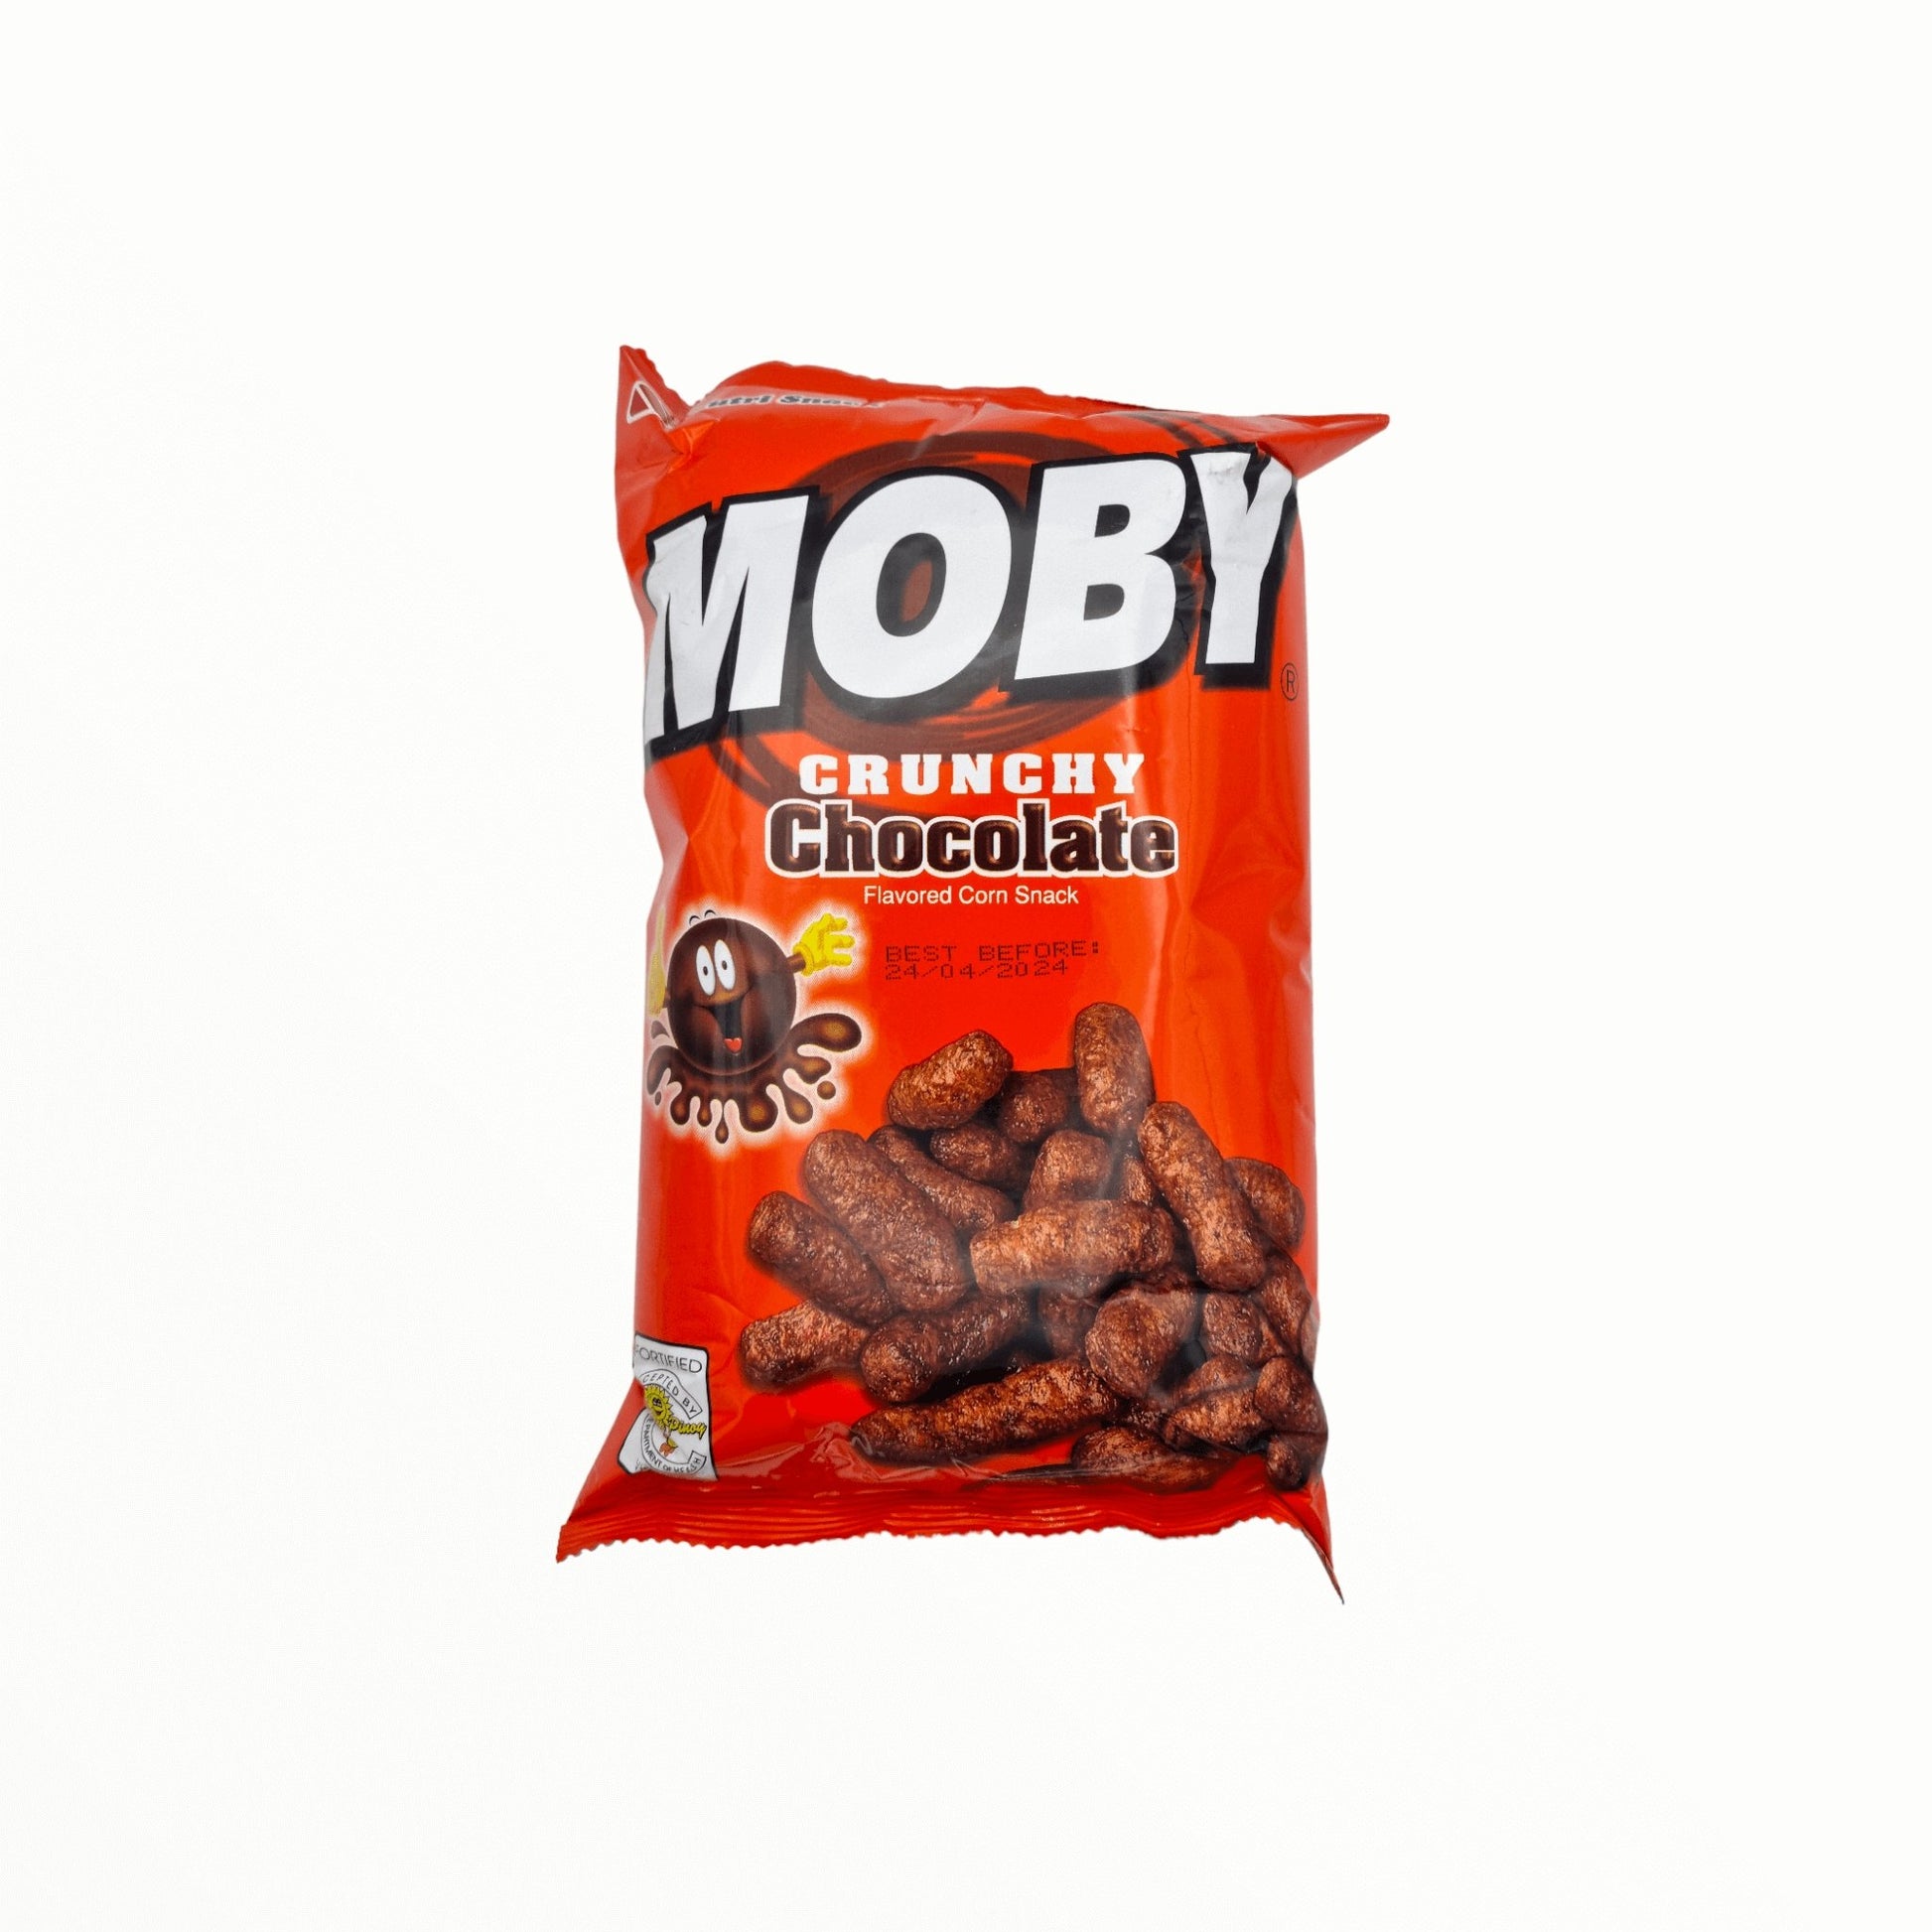 Moby Crunchy Chocolate 60g - Mabuhay Pinoy Asia Shop